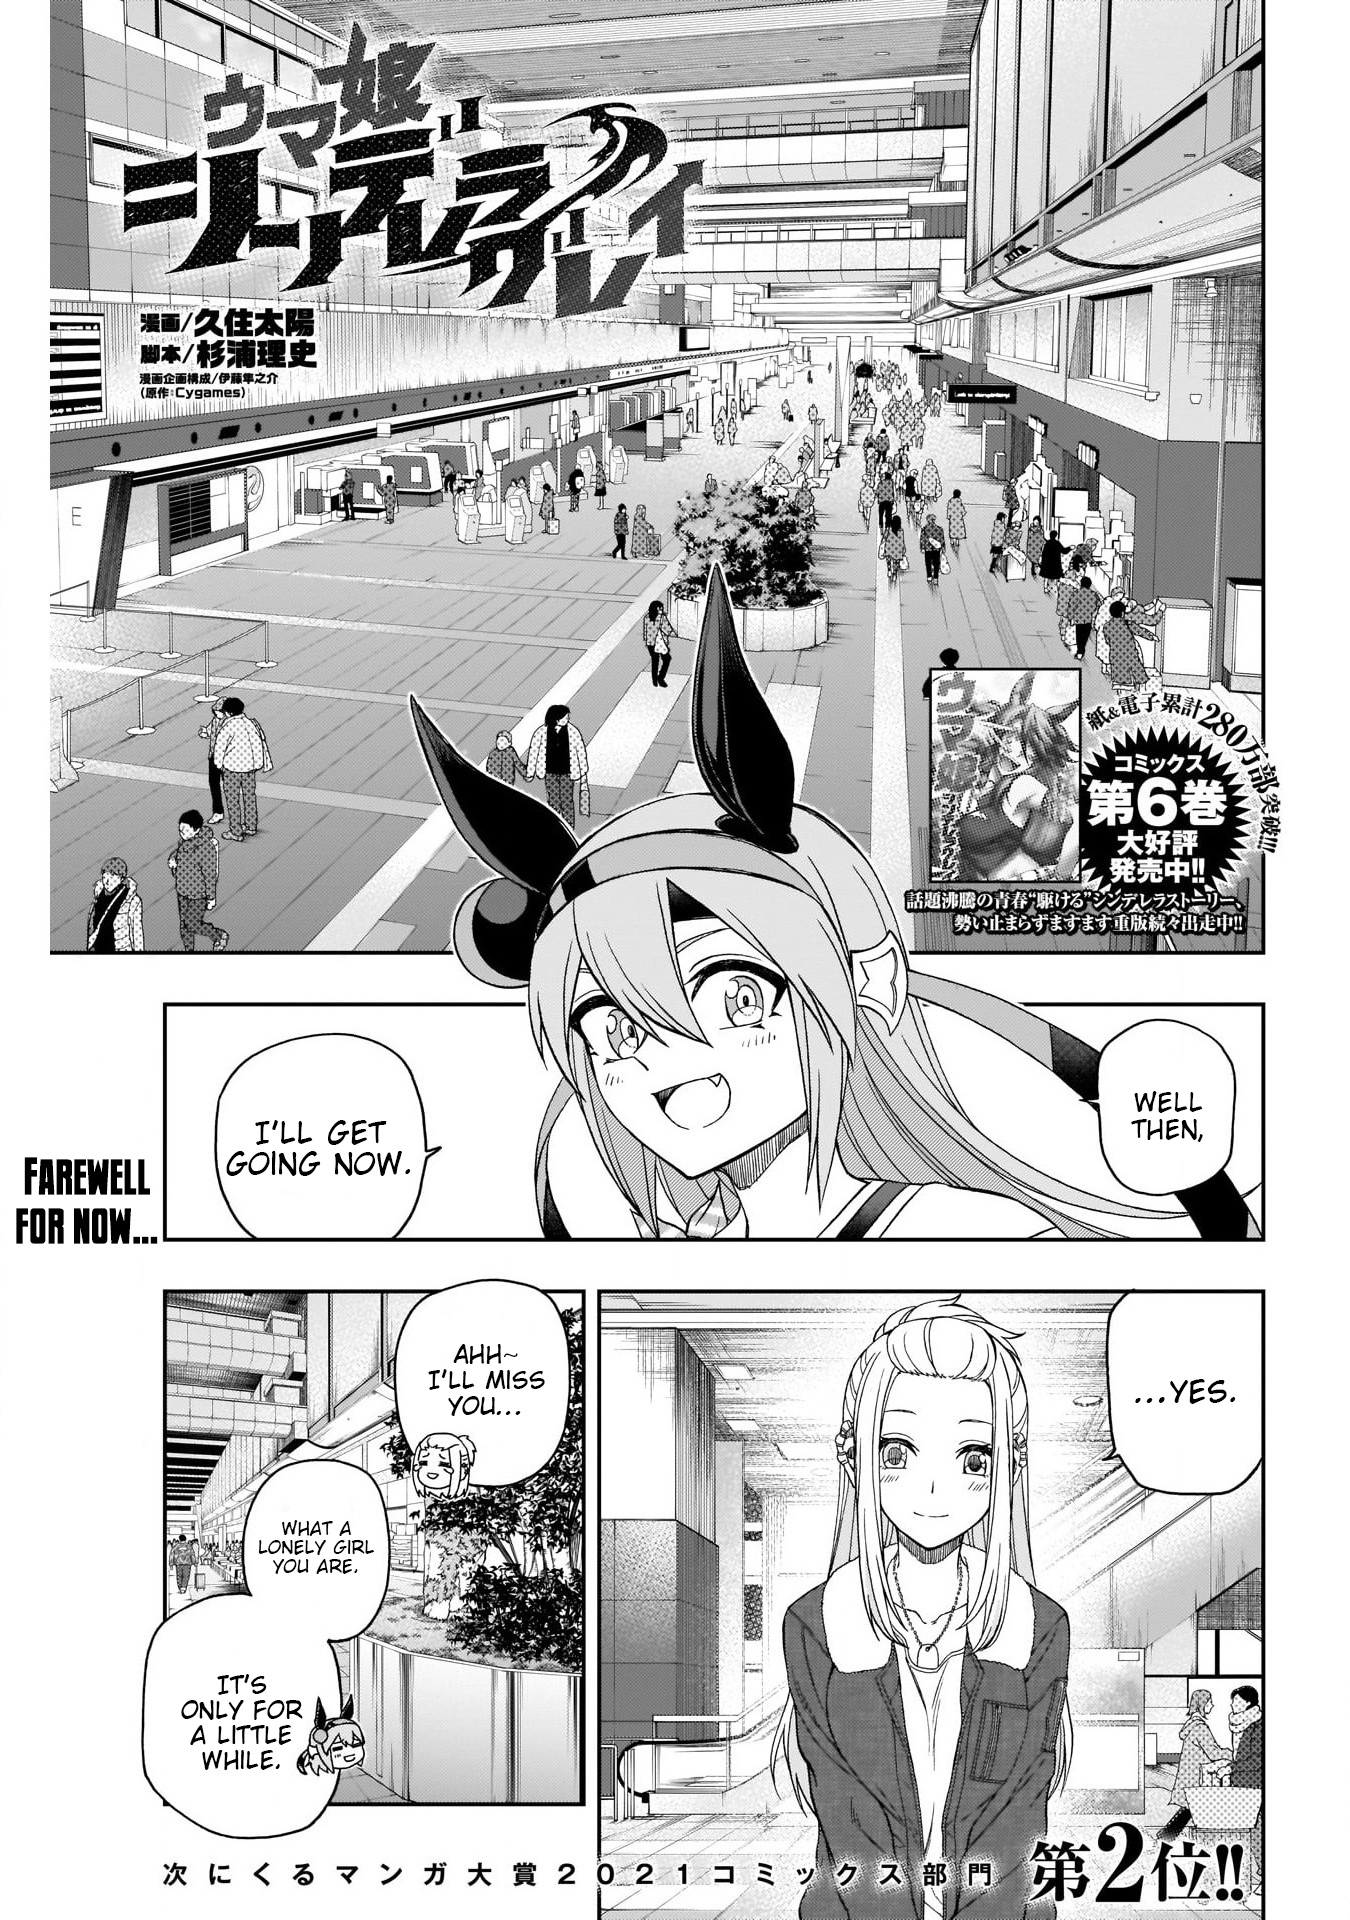 Uma Musume: Cinderella Gray Vol.8 Chapter 76: Welcome Home - Picture 1